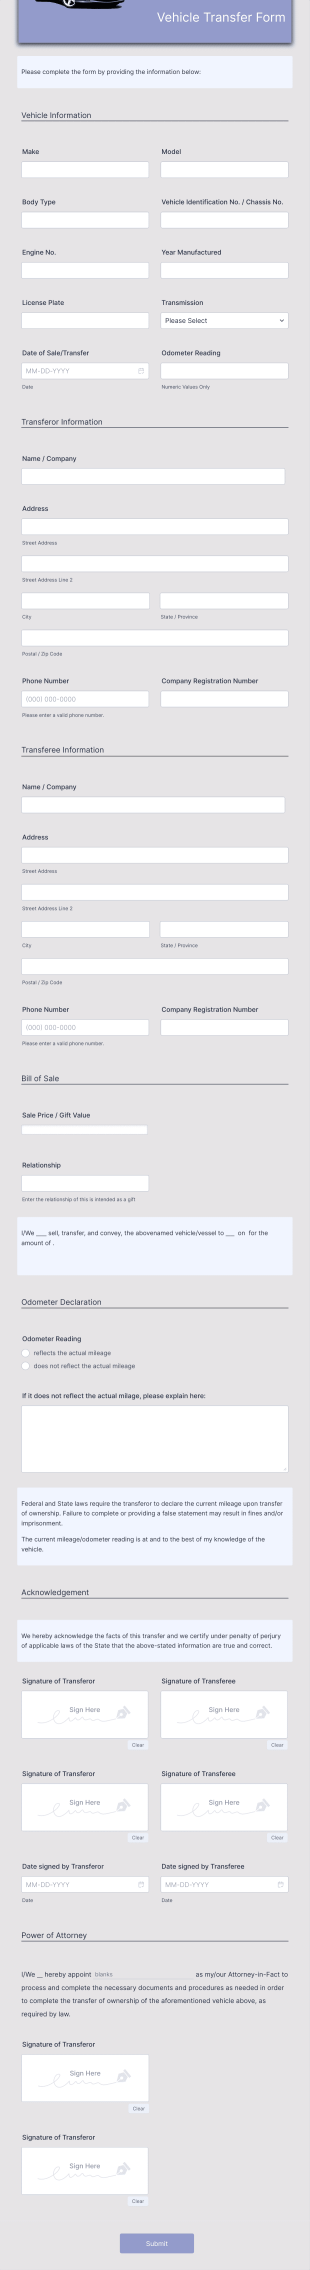 Vehicle Transfer Form Template